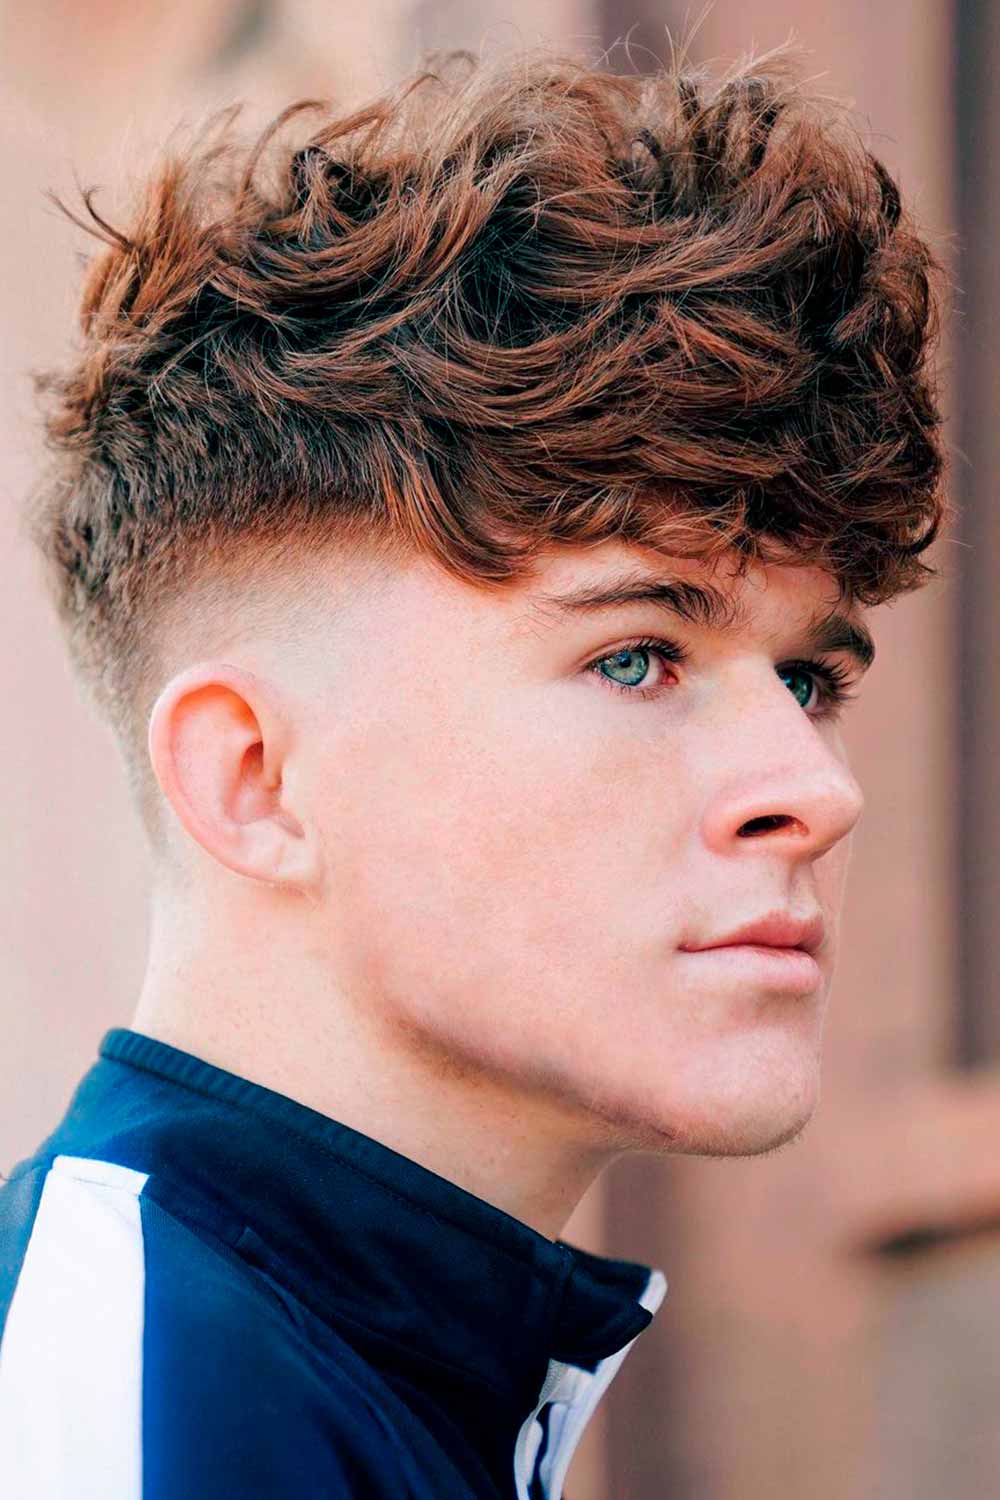 Messy Low Fade Unruly Hair #hairtypes #hairtypesmen #menhairtype